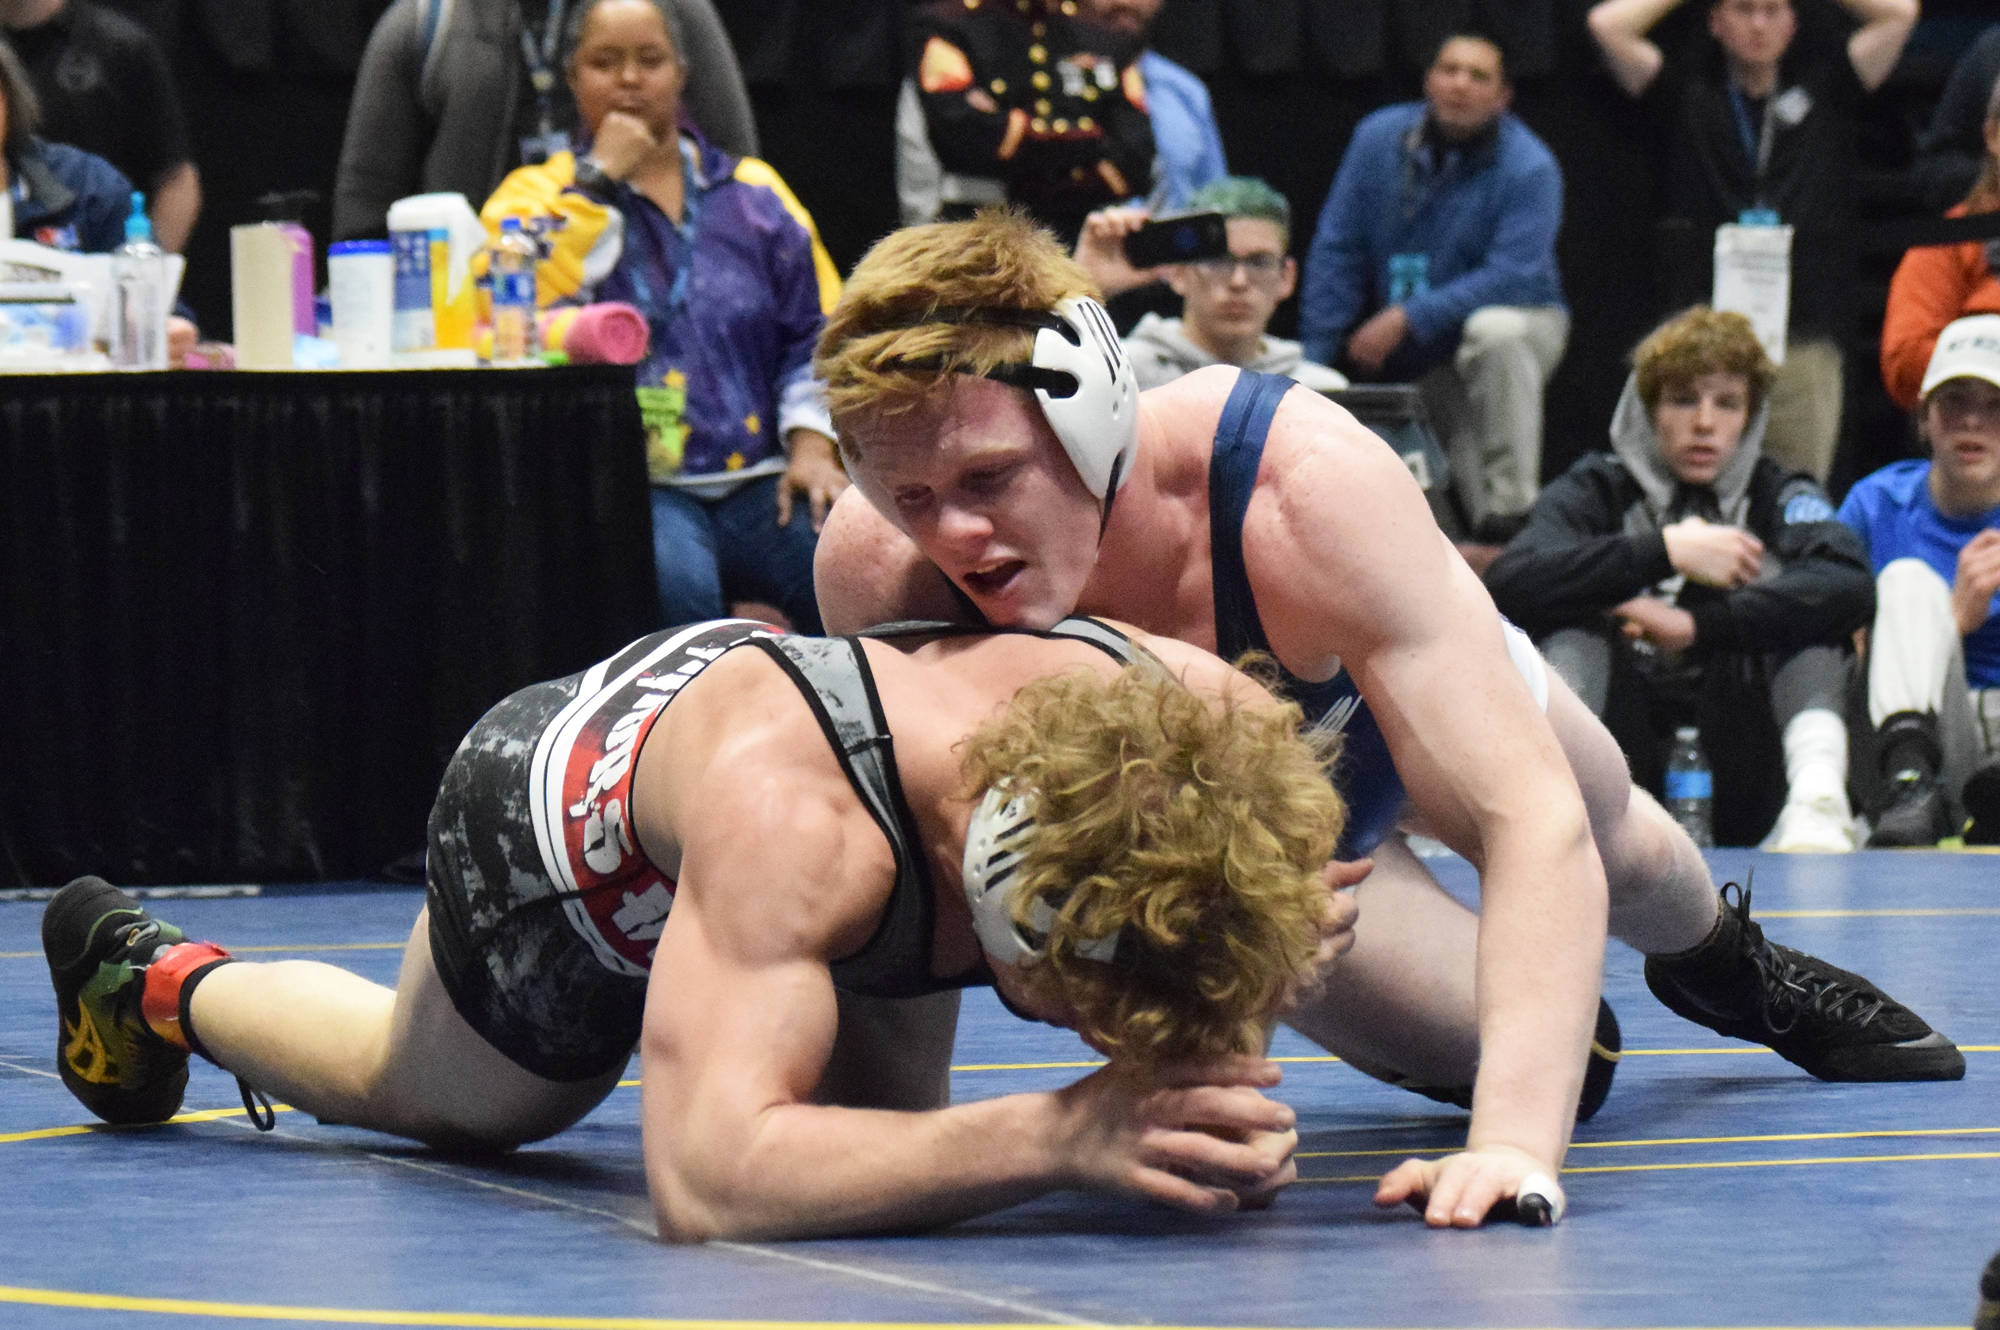 Soldotna’s Sean Babbitt competes against Wasilla’s Colton Lindquist in the Division I boys 171-pound final Saturday, Dec. 21, 2019, at the ASAA State Wrestling Championships at the Alaska Airlines Center in Anchorage, Alaska. (Photo by Joey Klecka/Peninsula Clarion)